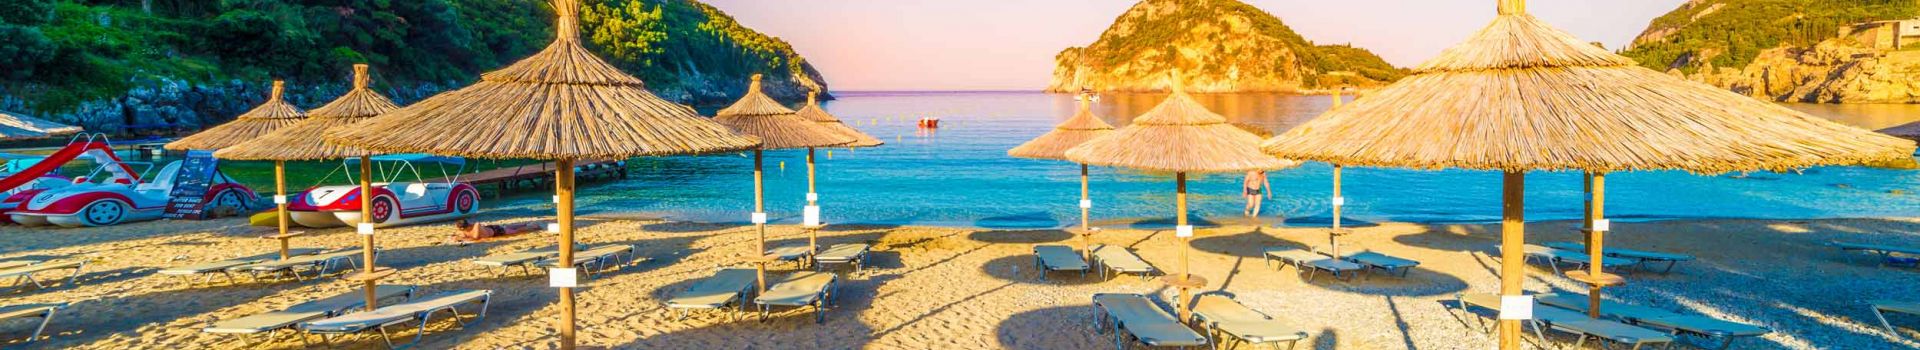 All Inclusive Holidays to Corfu with Cassidy Travel